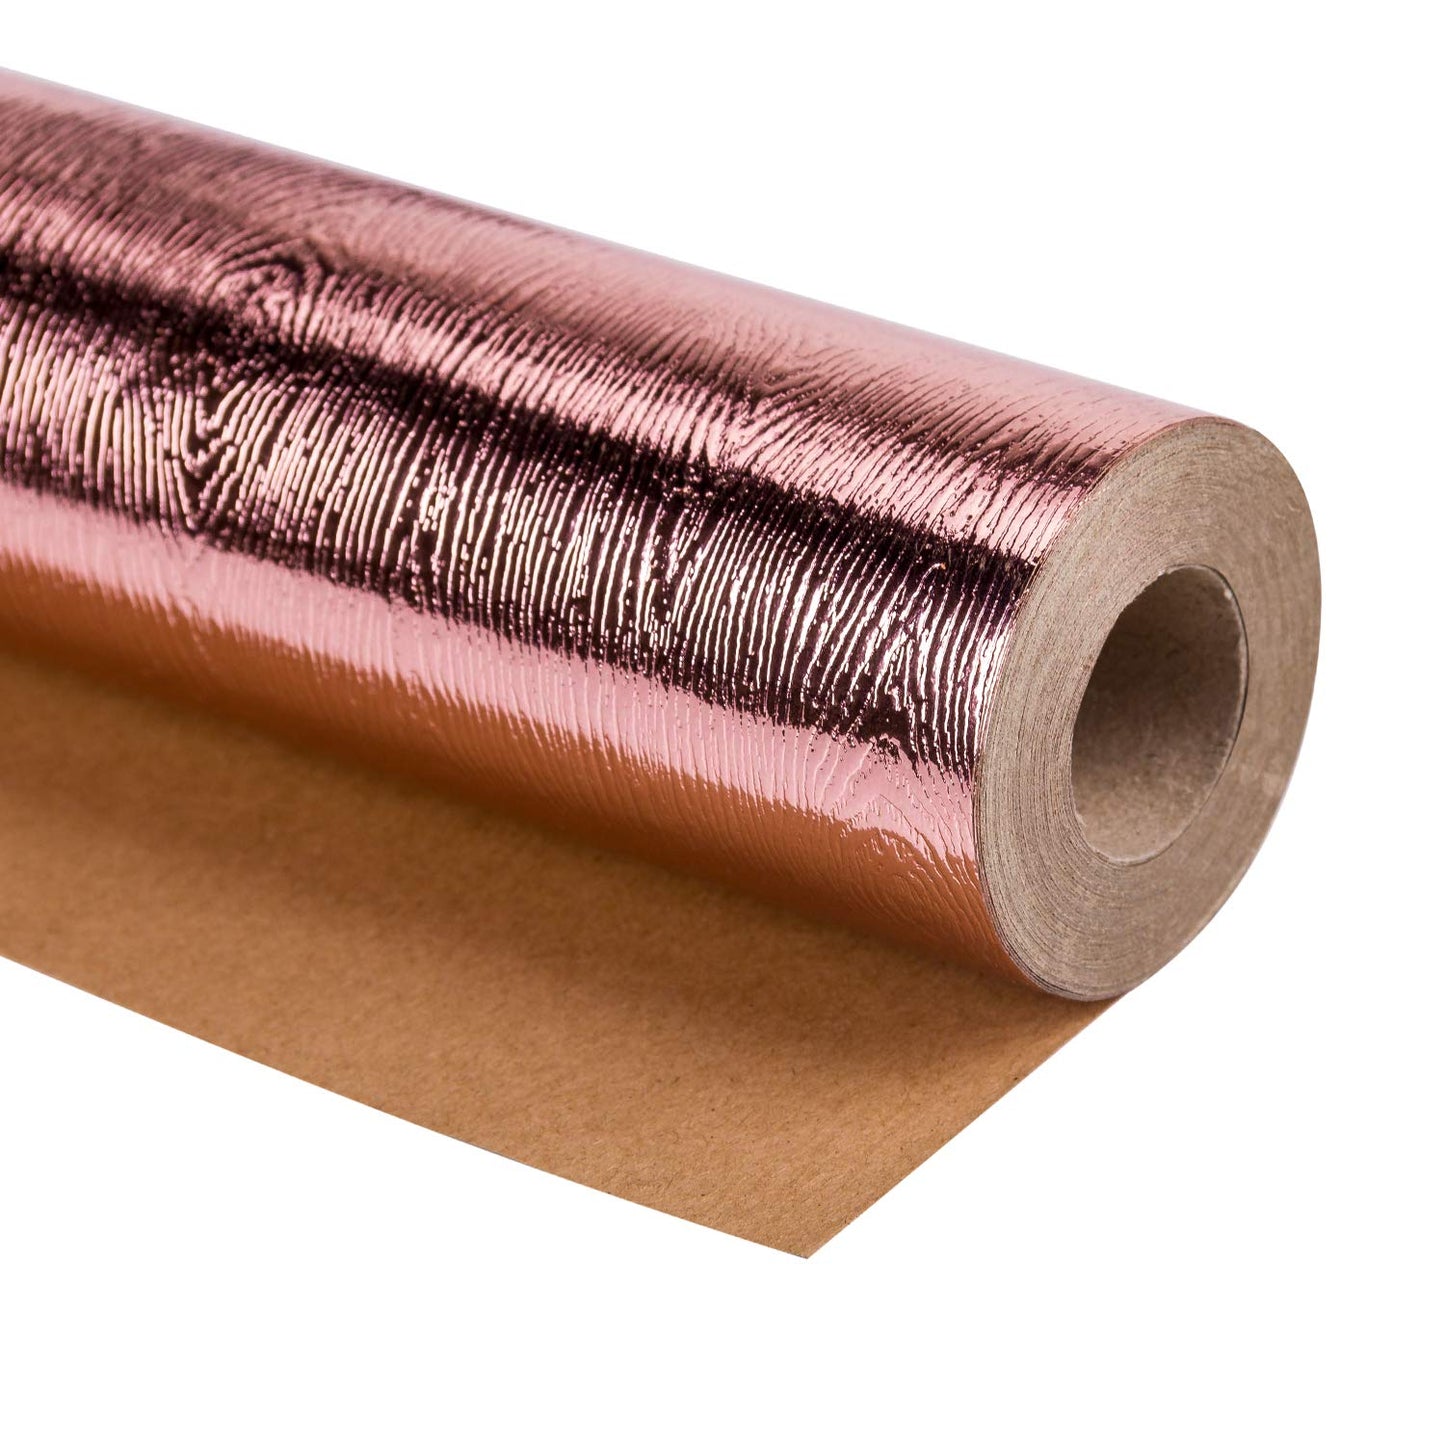 Embossed Wood Grain Wrapping Paper Roll Glossy Rose Gold Ream Wholesale Wrapaholic